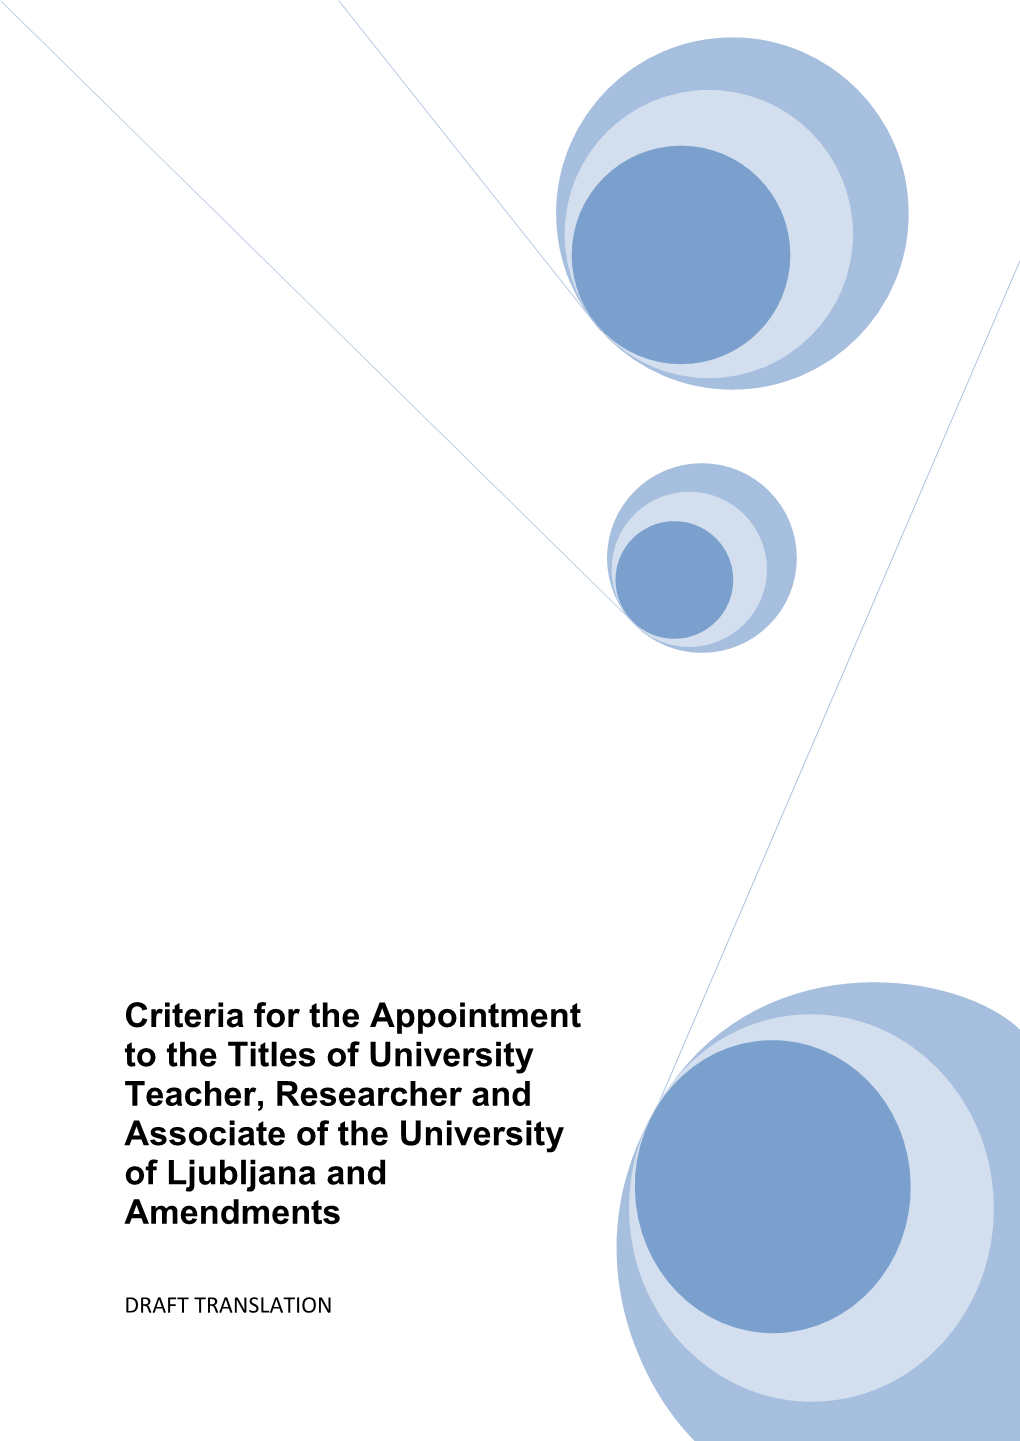 Criteria for the Appointment to the Titles of University Teacher, Researcher and Associate of the University of Ljubljana and Amendments